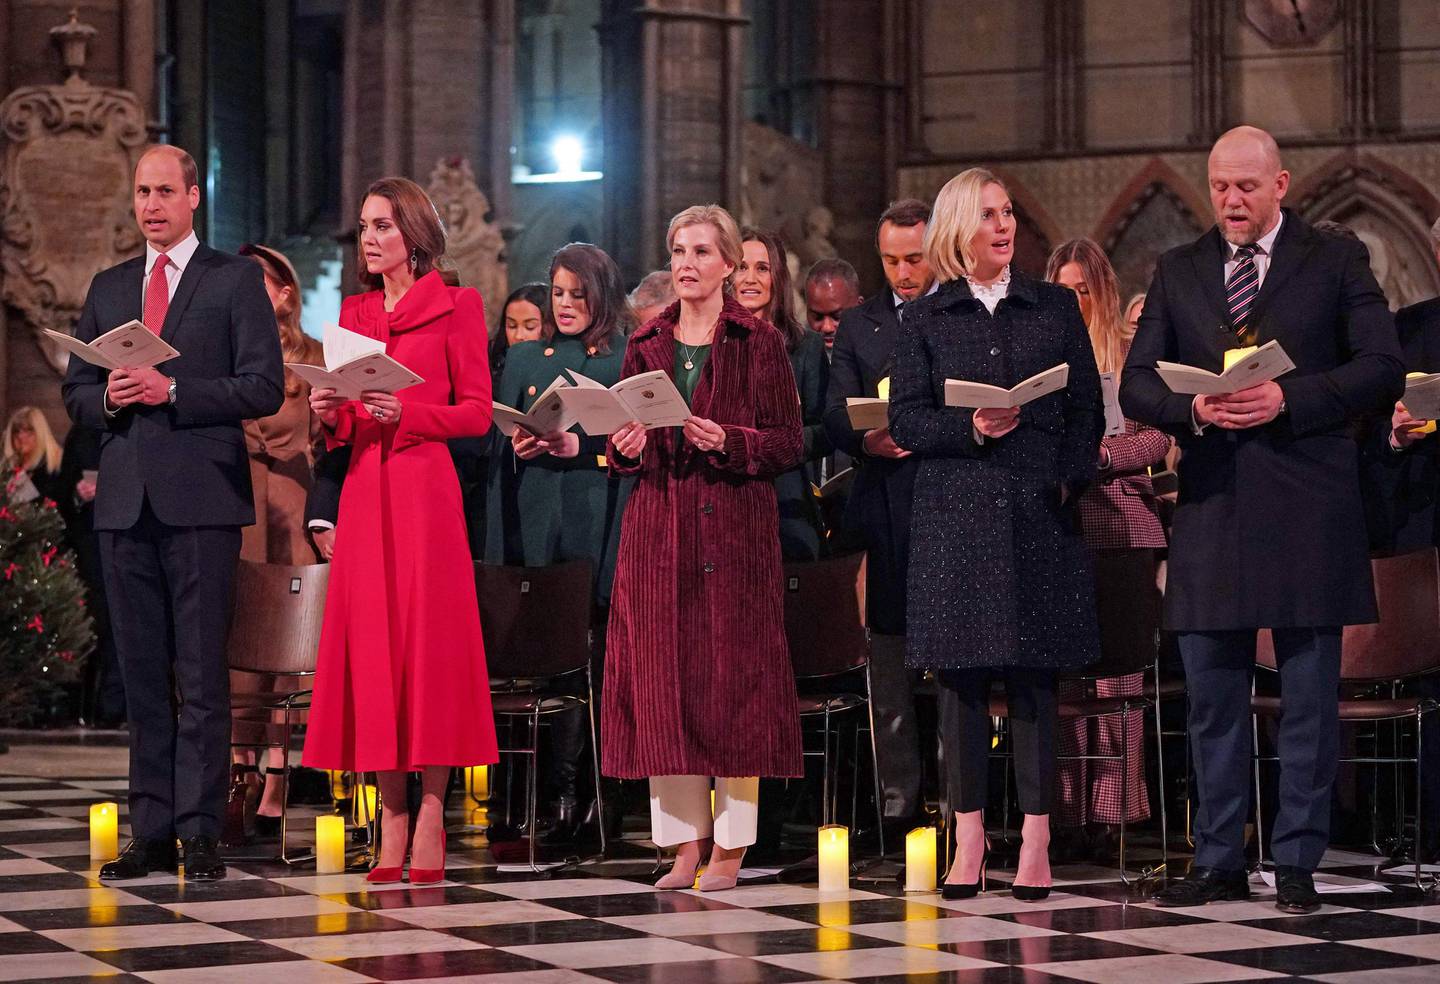 From left, Britain's Prince William and his wife Kate, Sophie, Countess of Wessex, Zara Phillips and Mike Tindall at 'Royal Carols: Together At Christmas', at Westminster Abbey in London on December 8. AFP